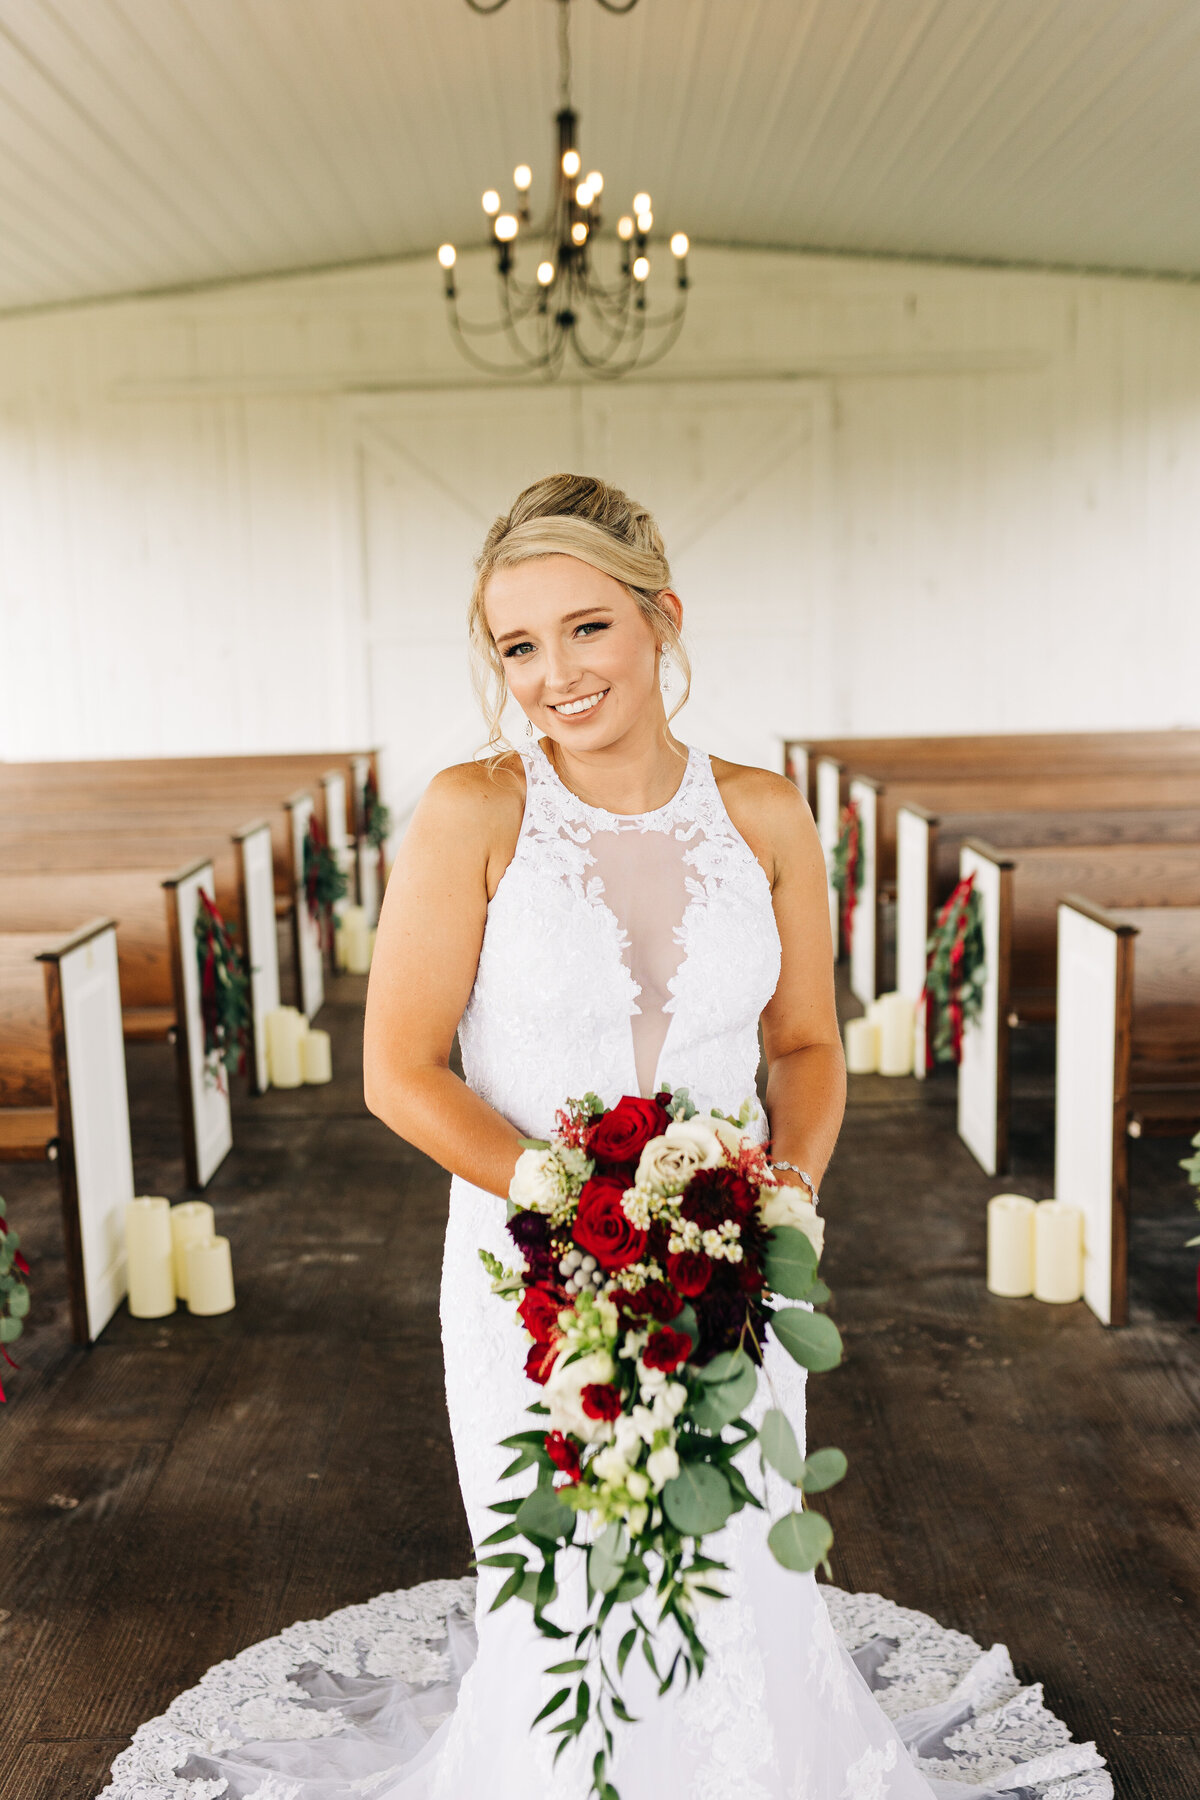 Bride holding red and green flowers